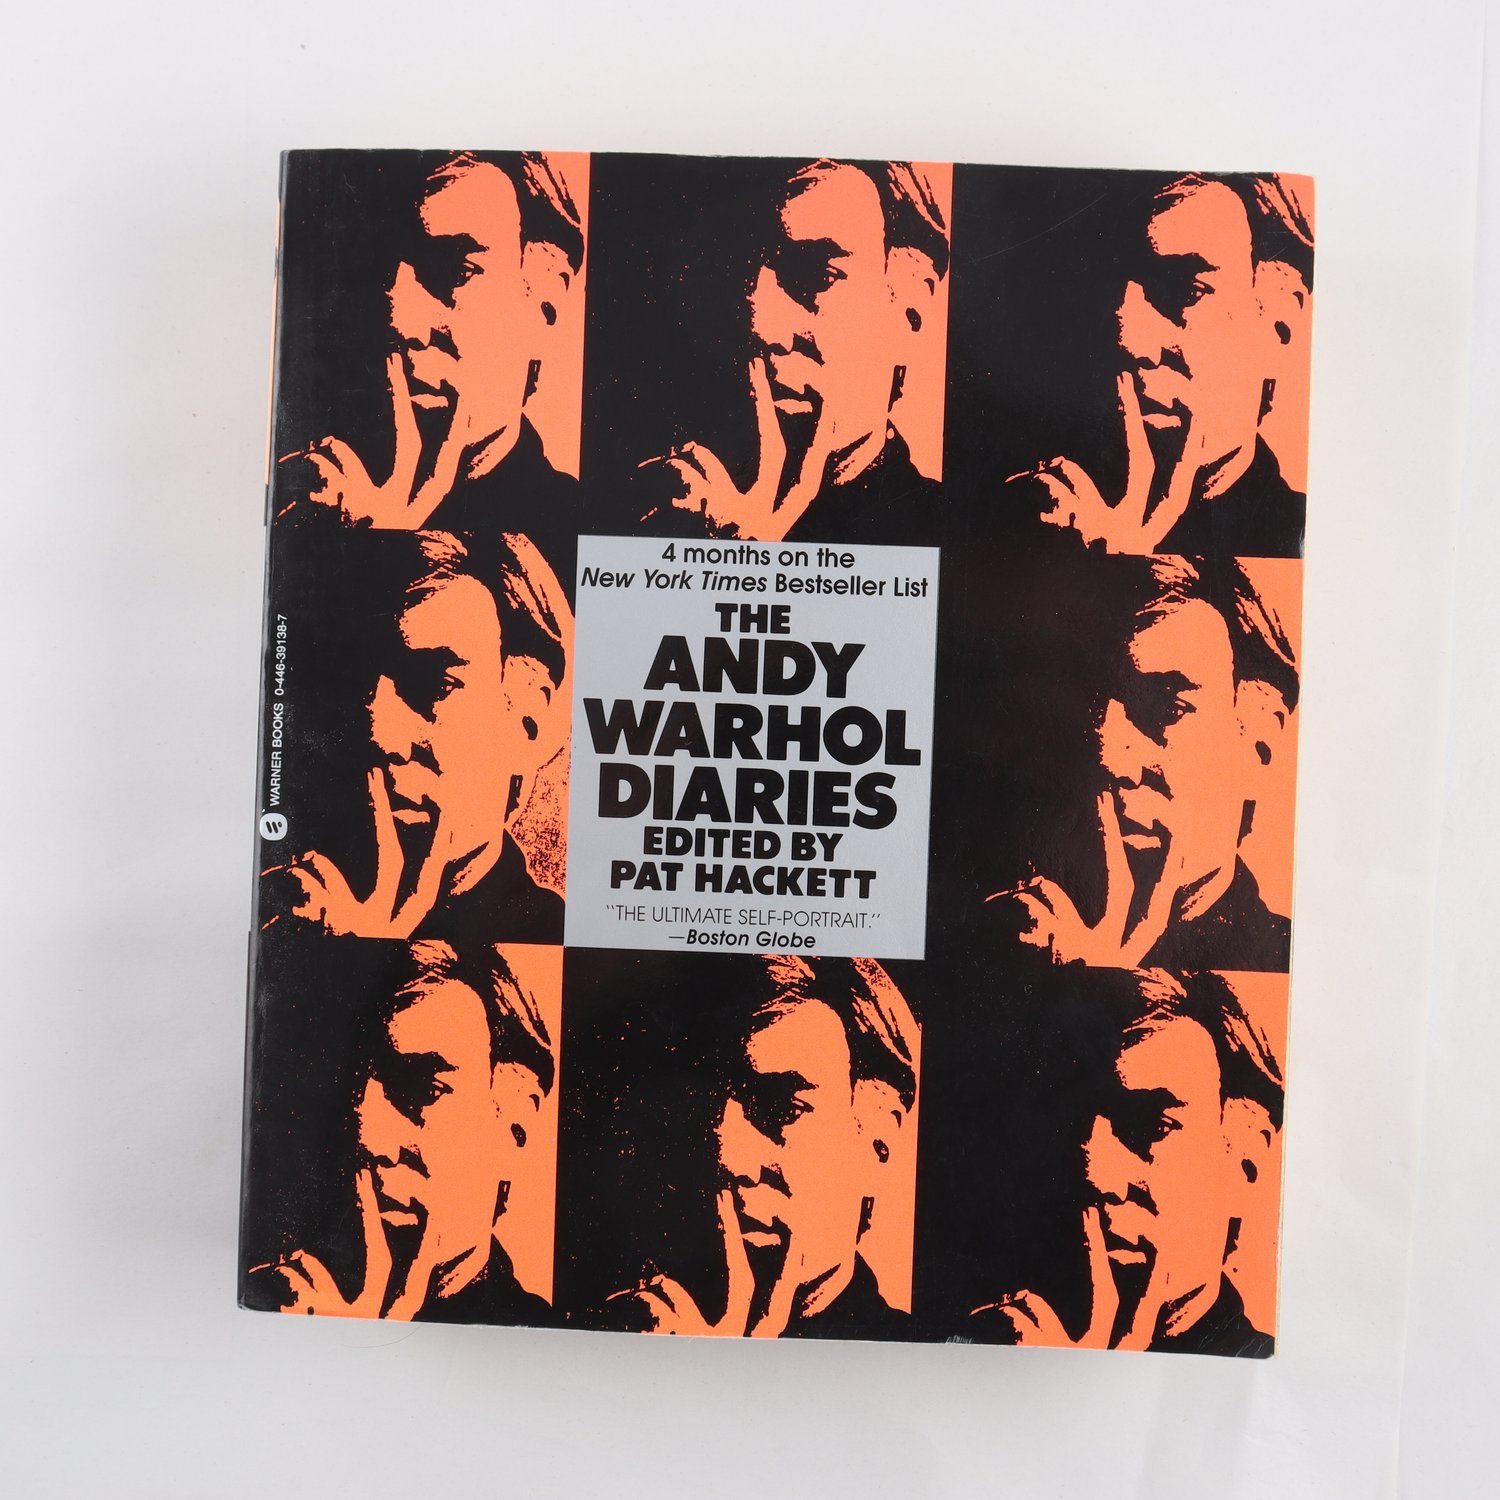 The Andy Warhol Diaries, Edited by Pat Hackett